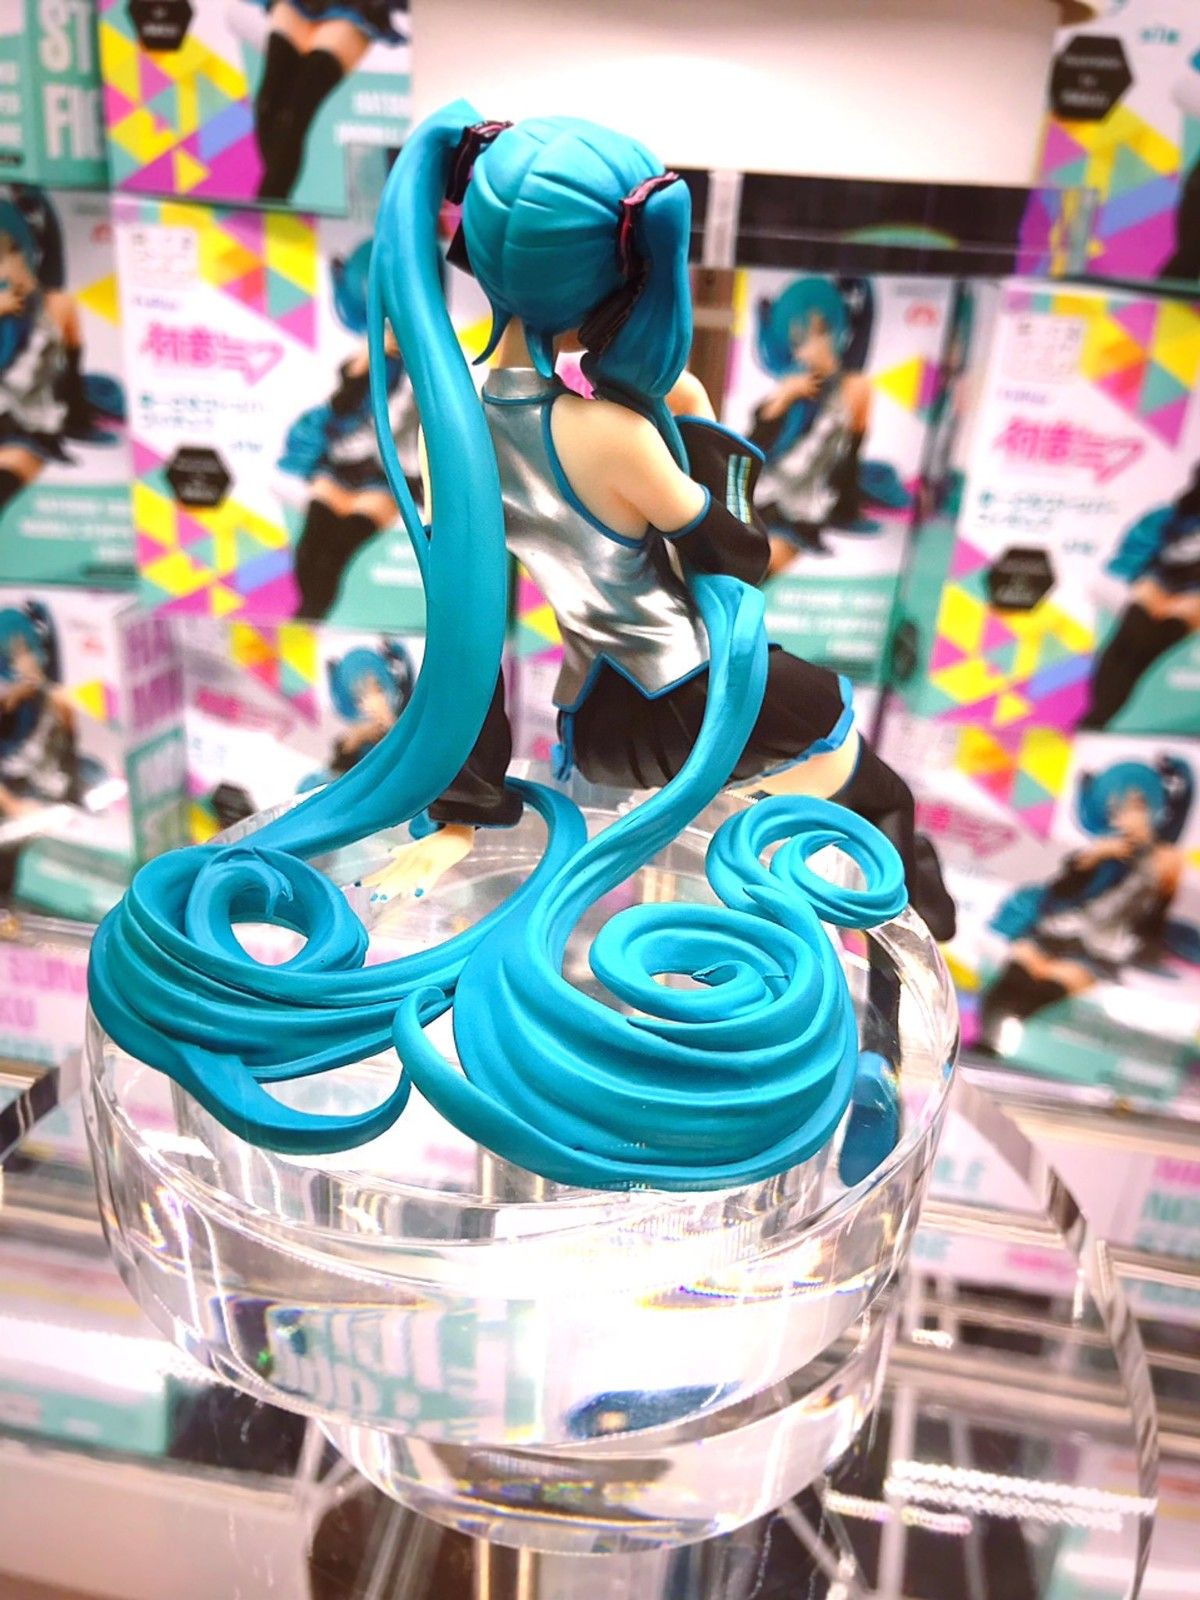 [Hatsune Miku] Nuyoru Stopper Figure, too much color and become a topic erotic 11